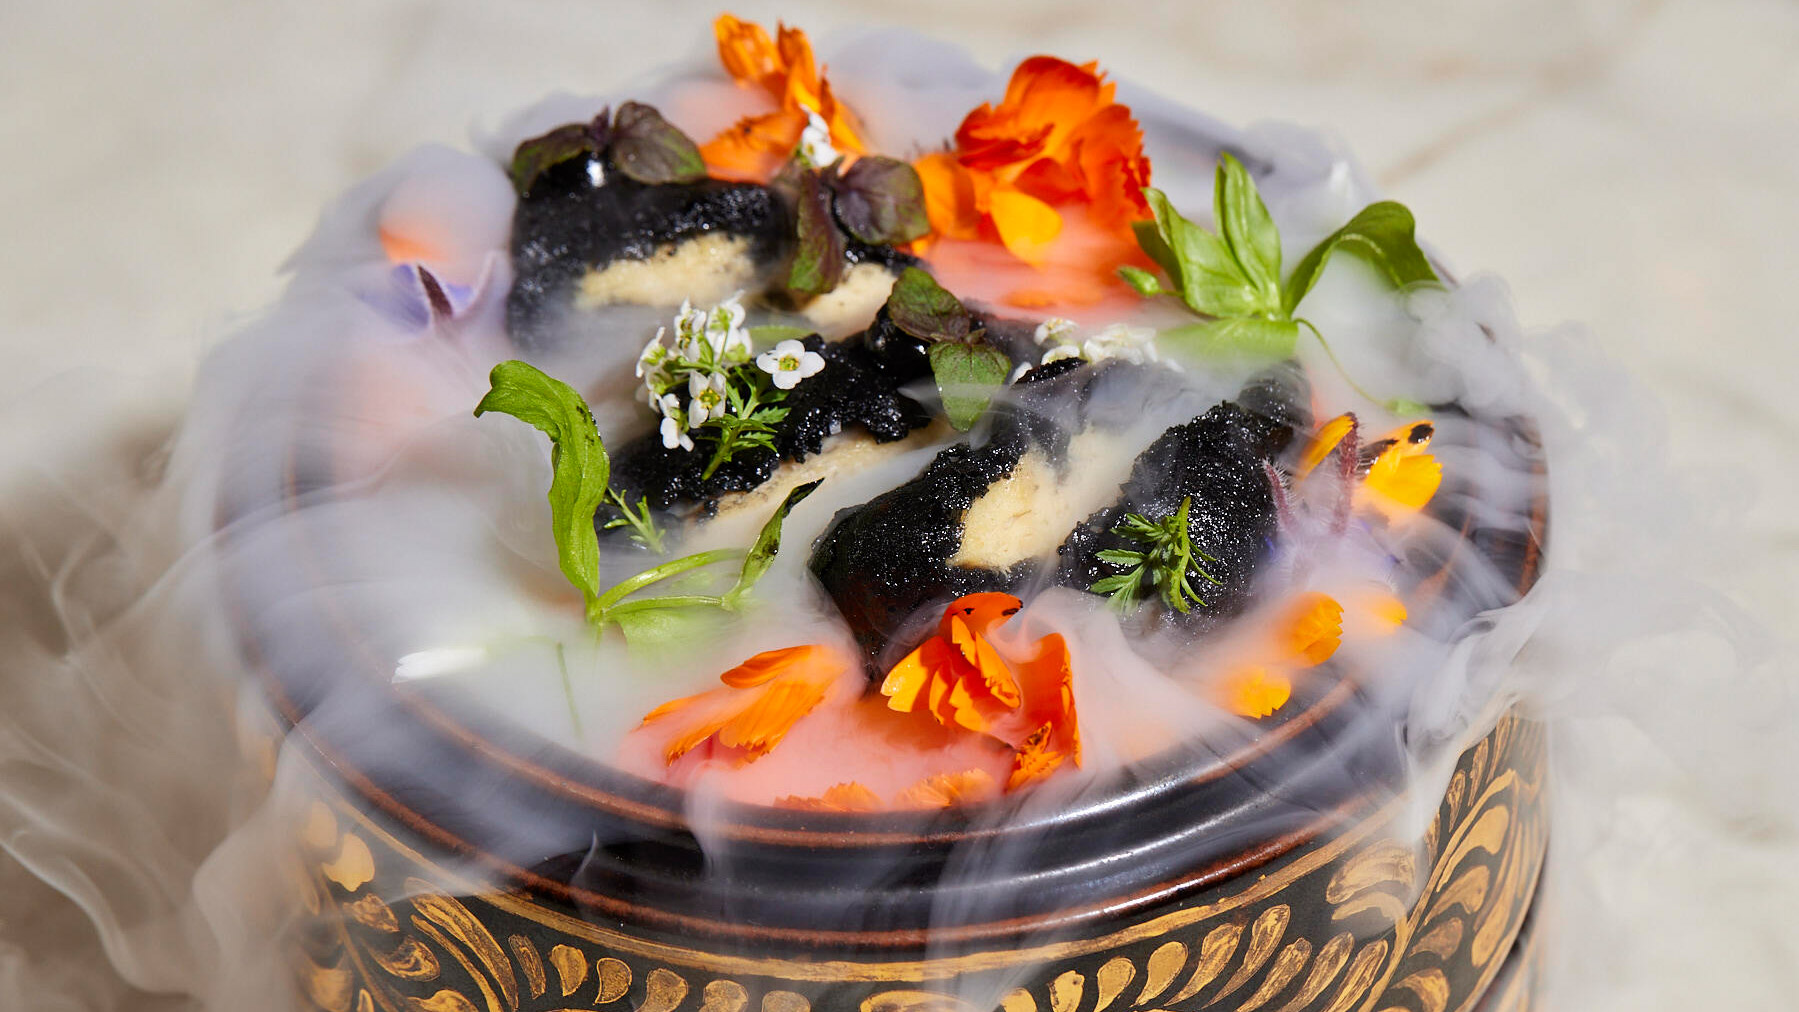 a steamy dish of cultivated chicken garnished with edible flowers